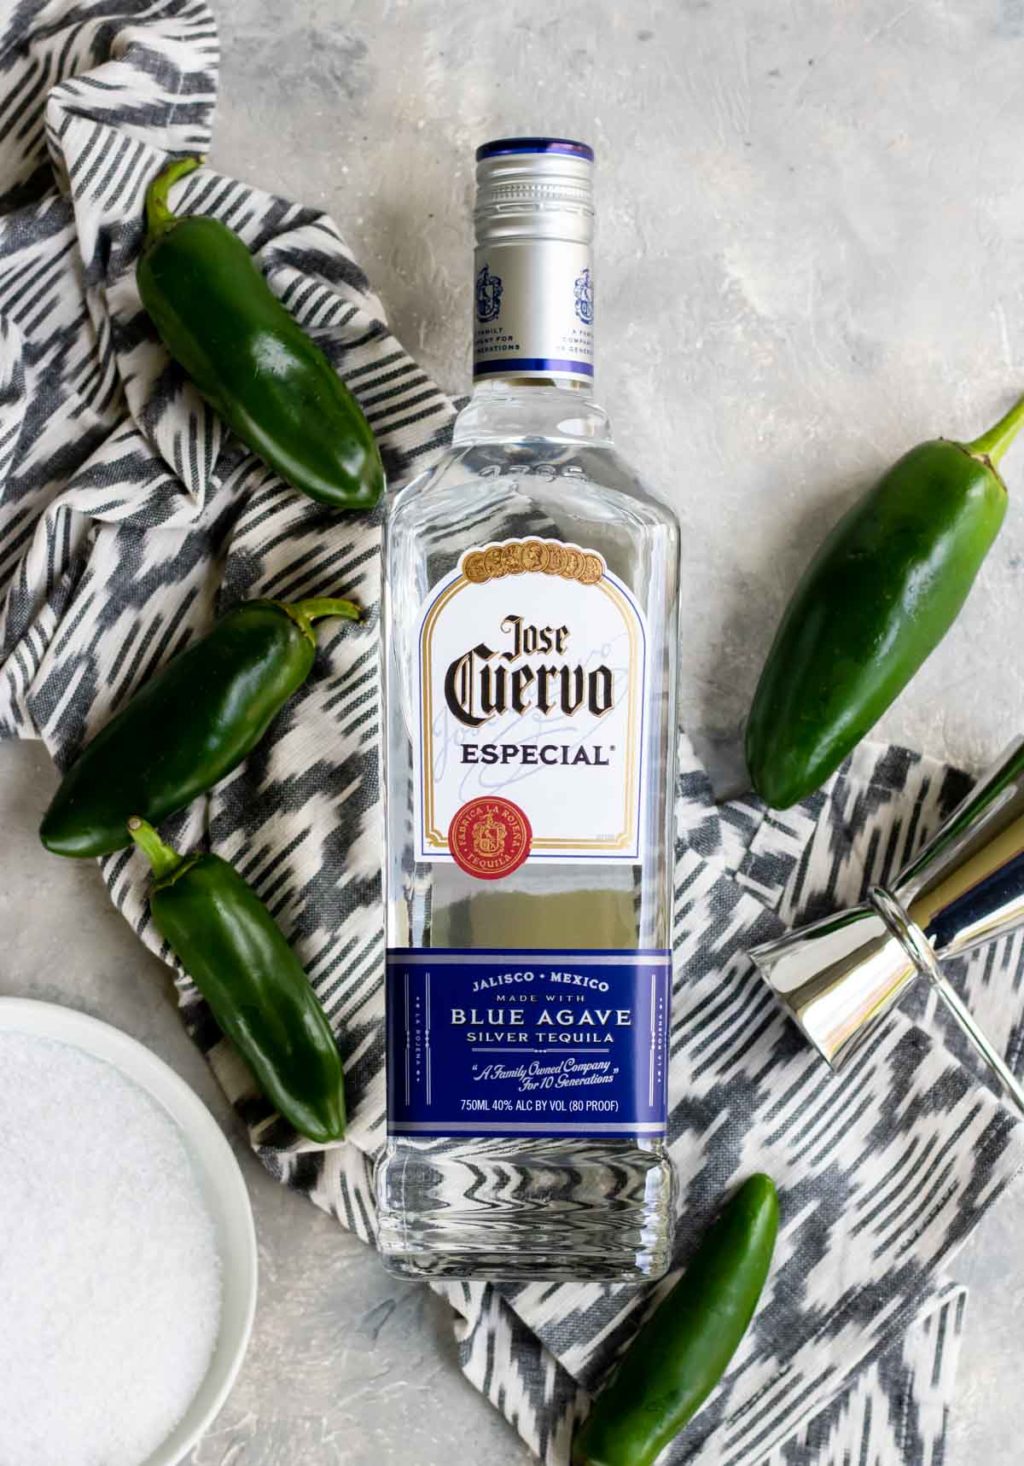 A bottle of Jose Cuervo Especial Blue Agave Silver tequila